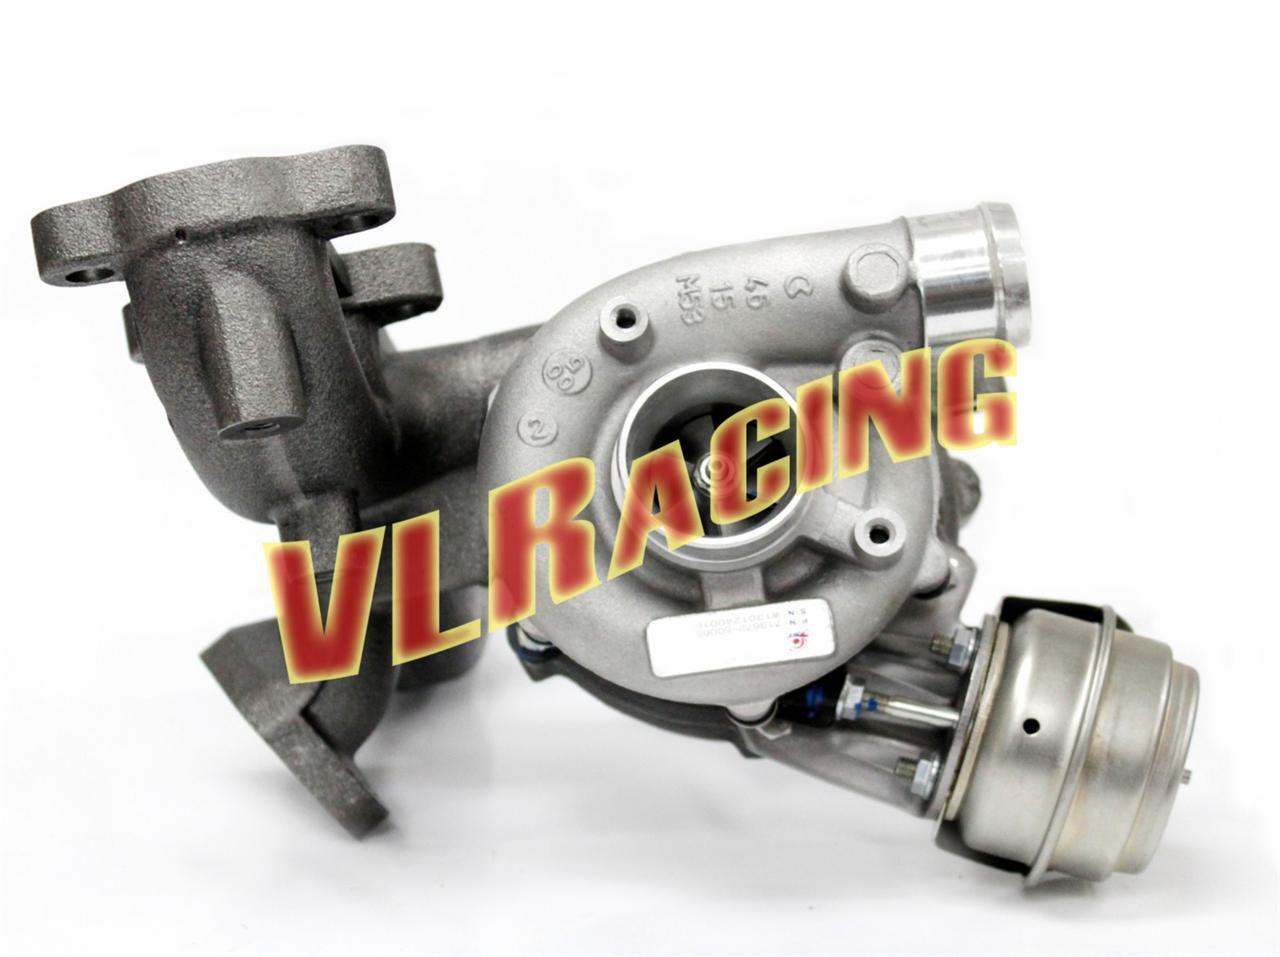 VW BEETLE GOLF JETTA TDI DIESEL Turbo charger with exhaust manifold turbo 1.9 L